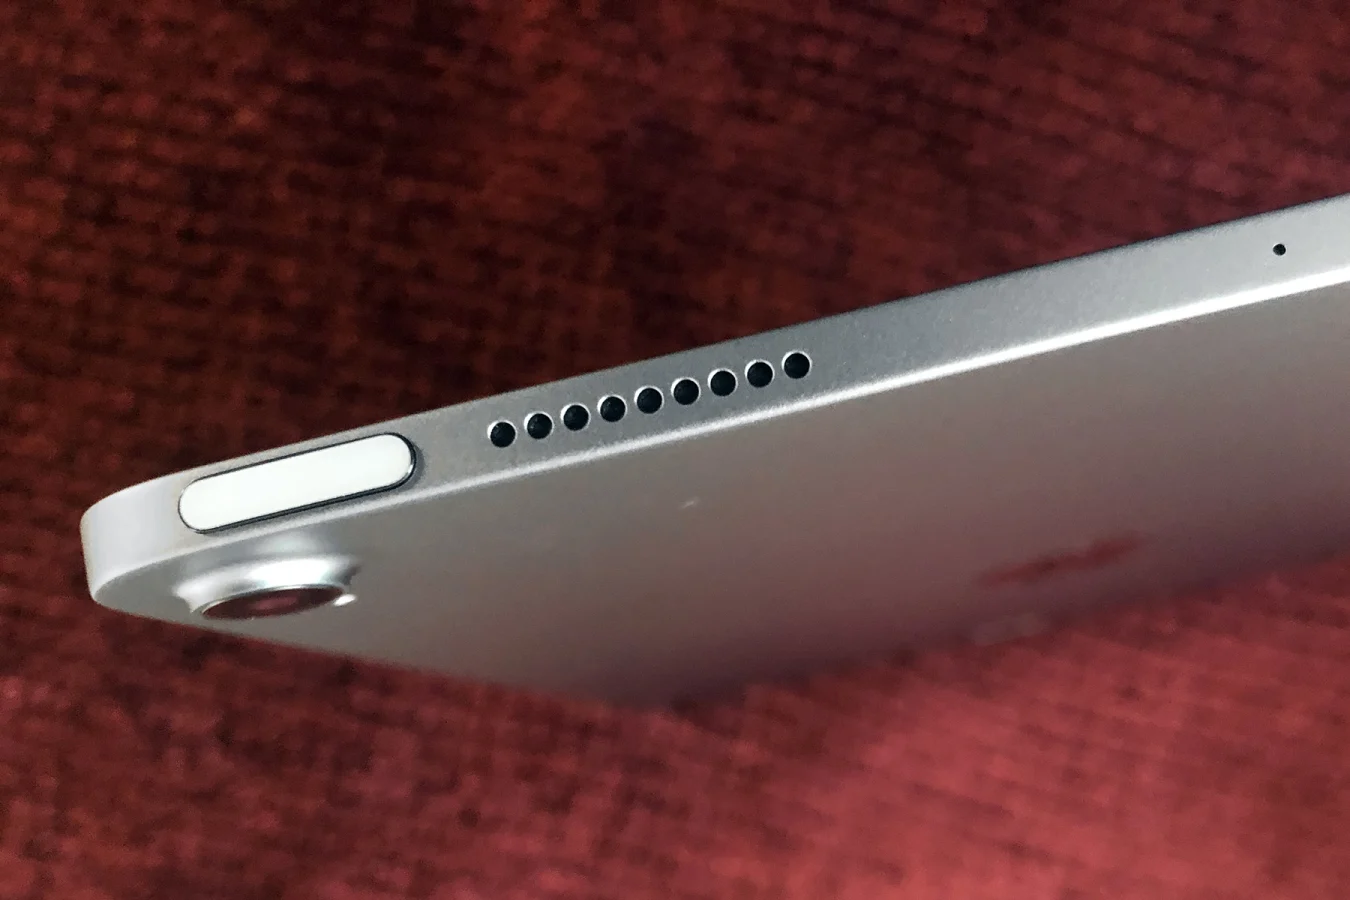 The Touch ID sensor in the 2020 Apple iPad Air lives inside the lock button.